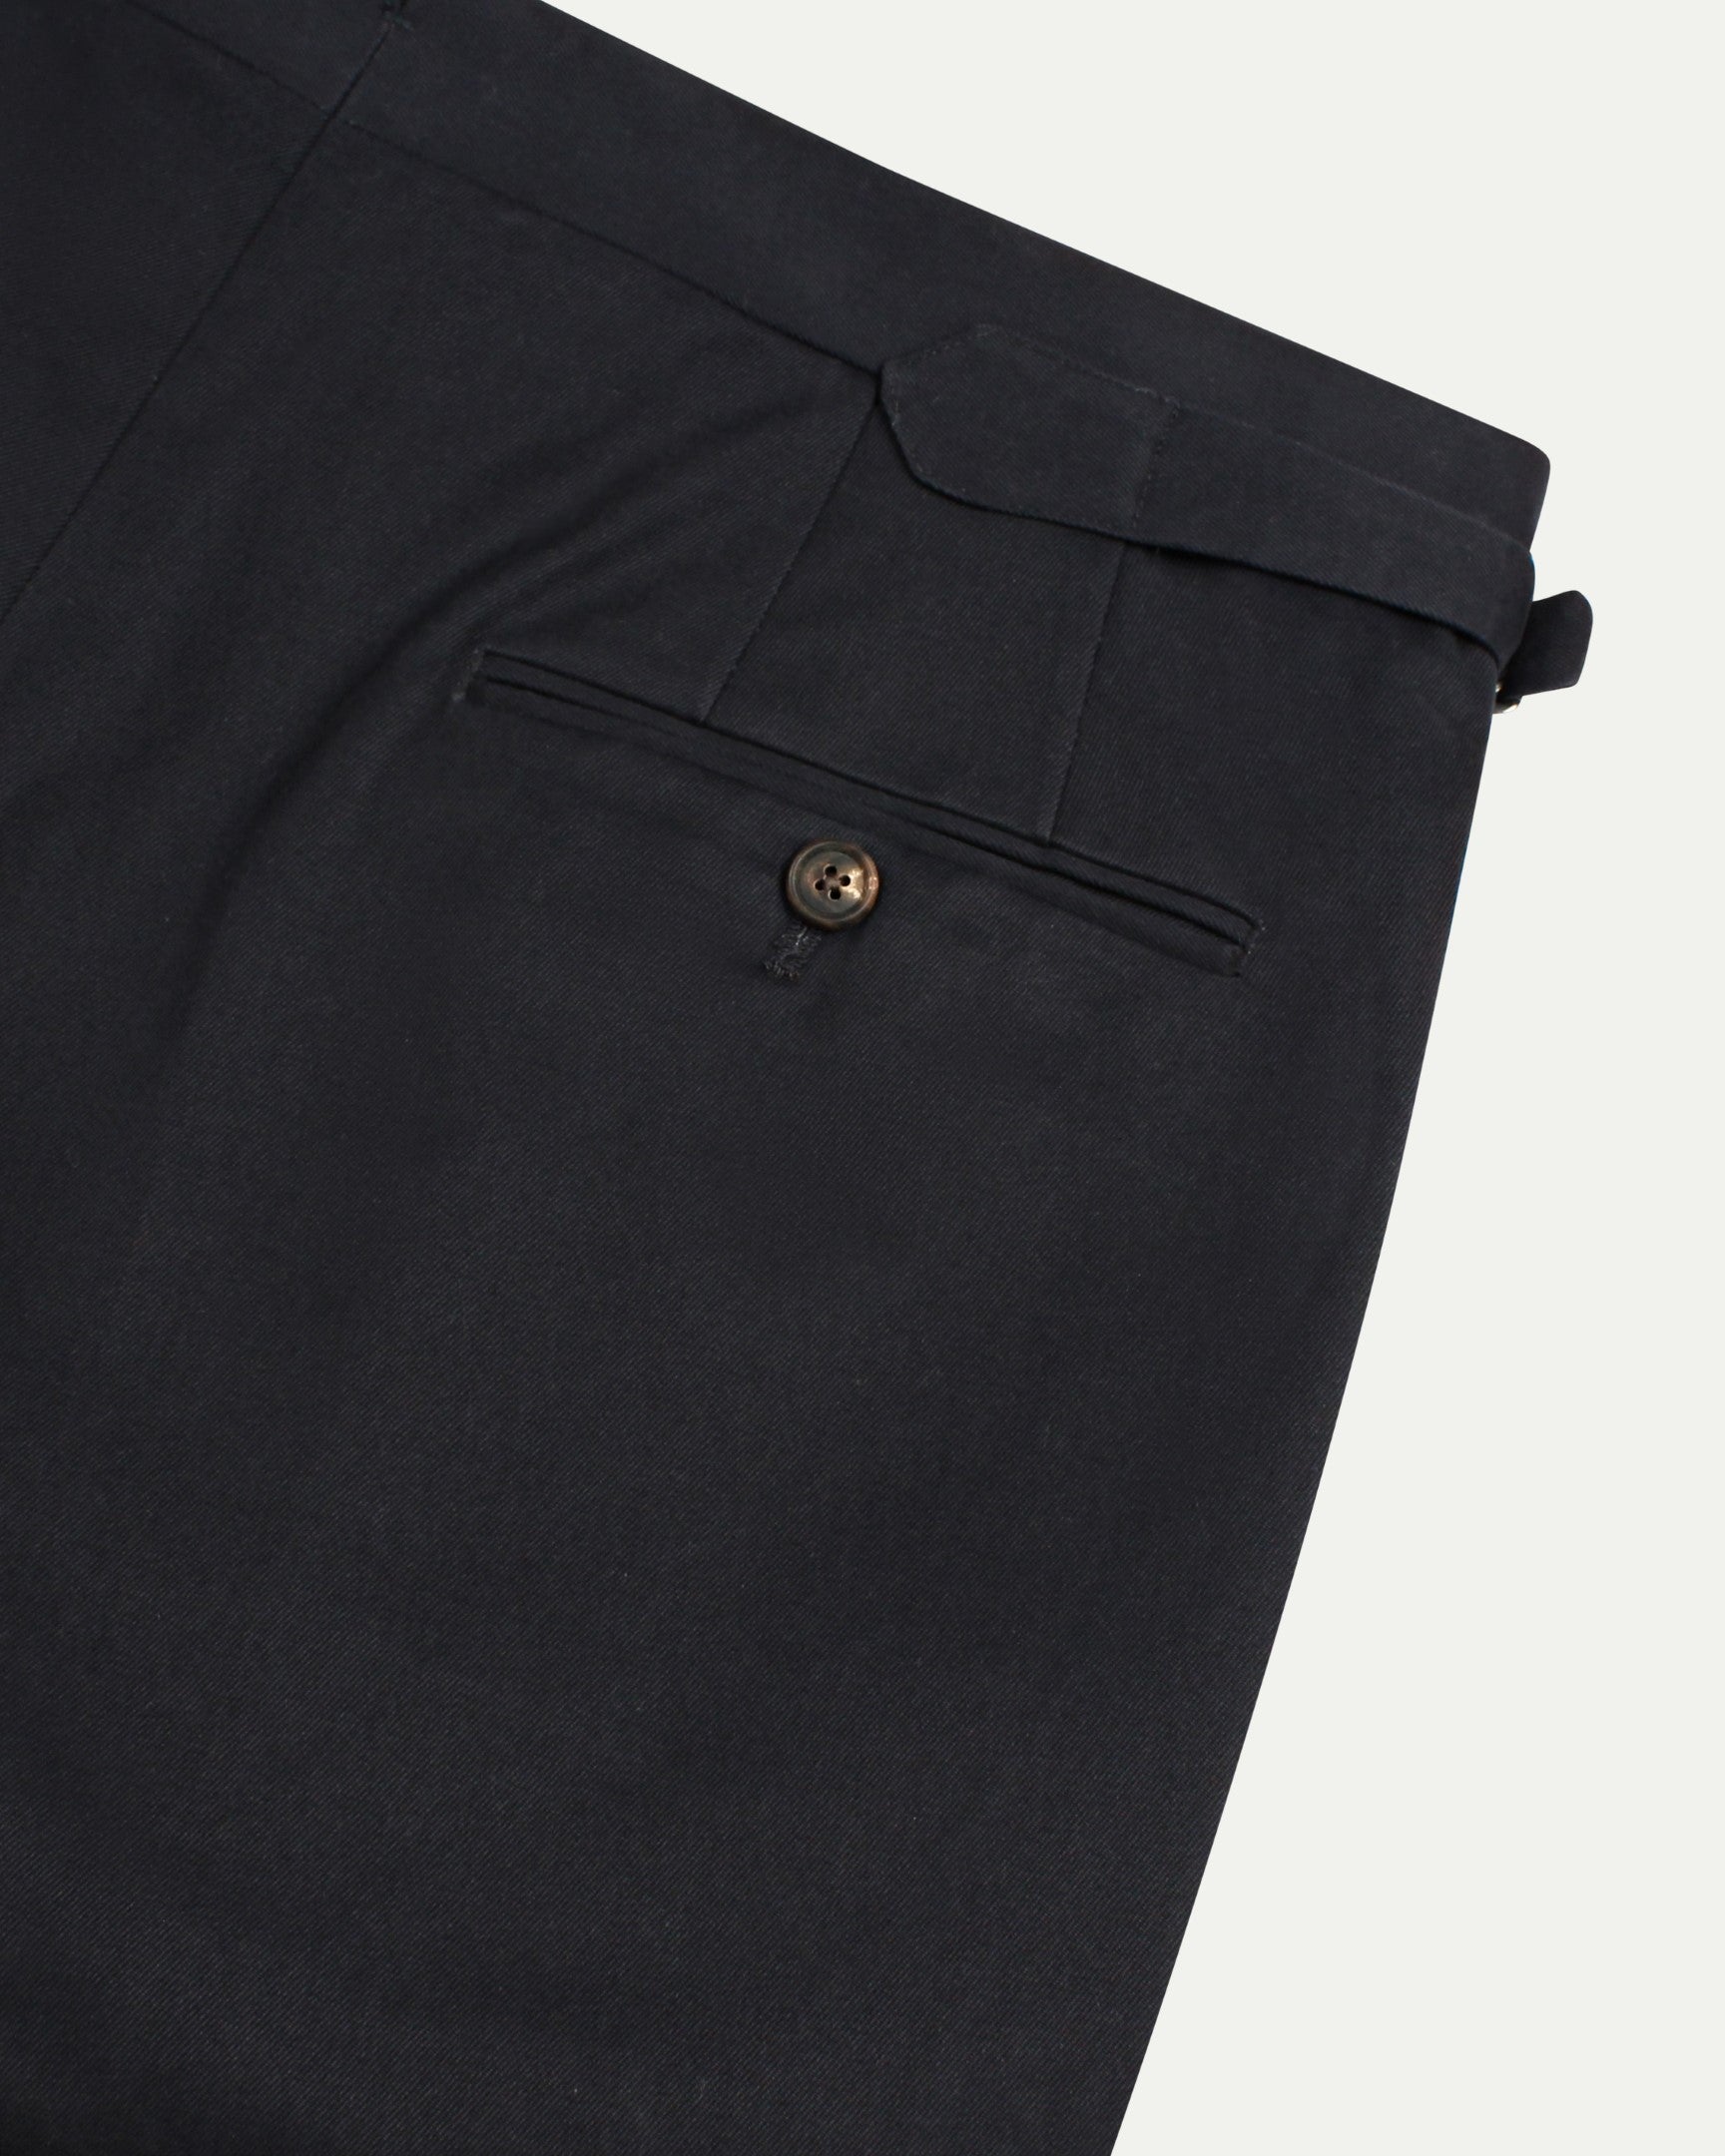 Made-To-Order Trousers in Navy Cotton Drill